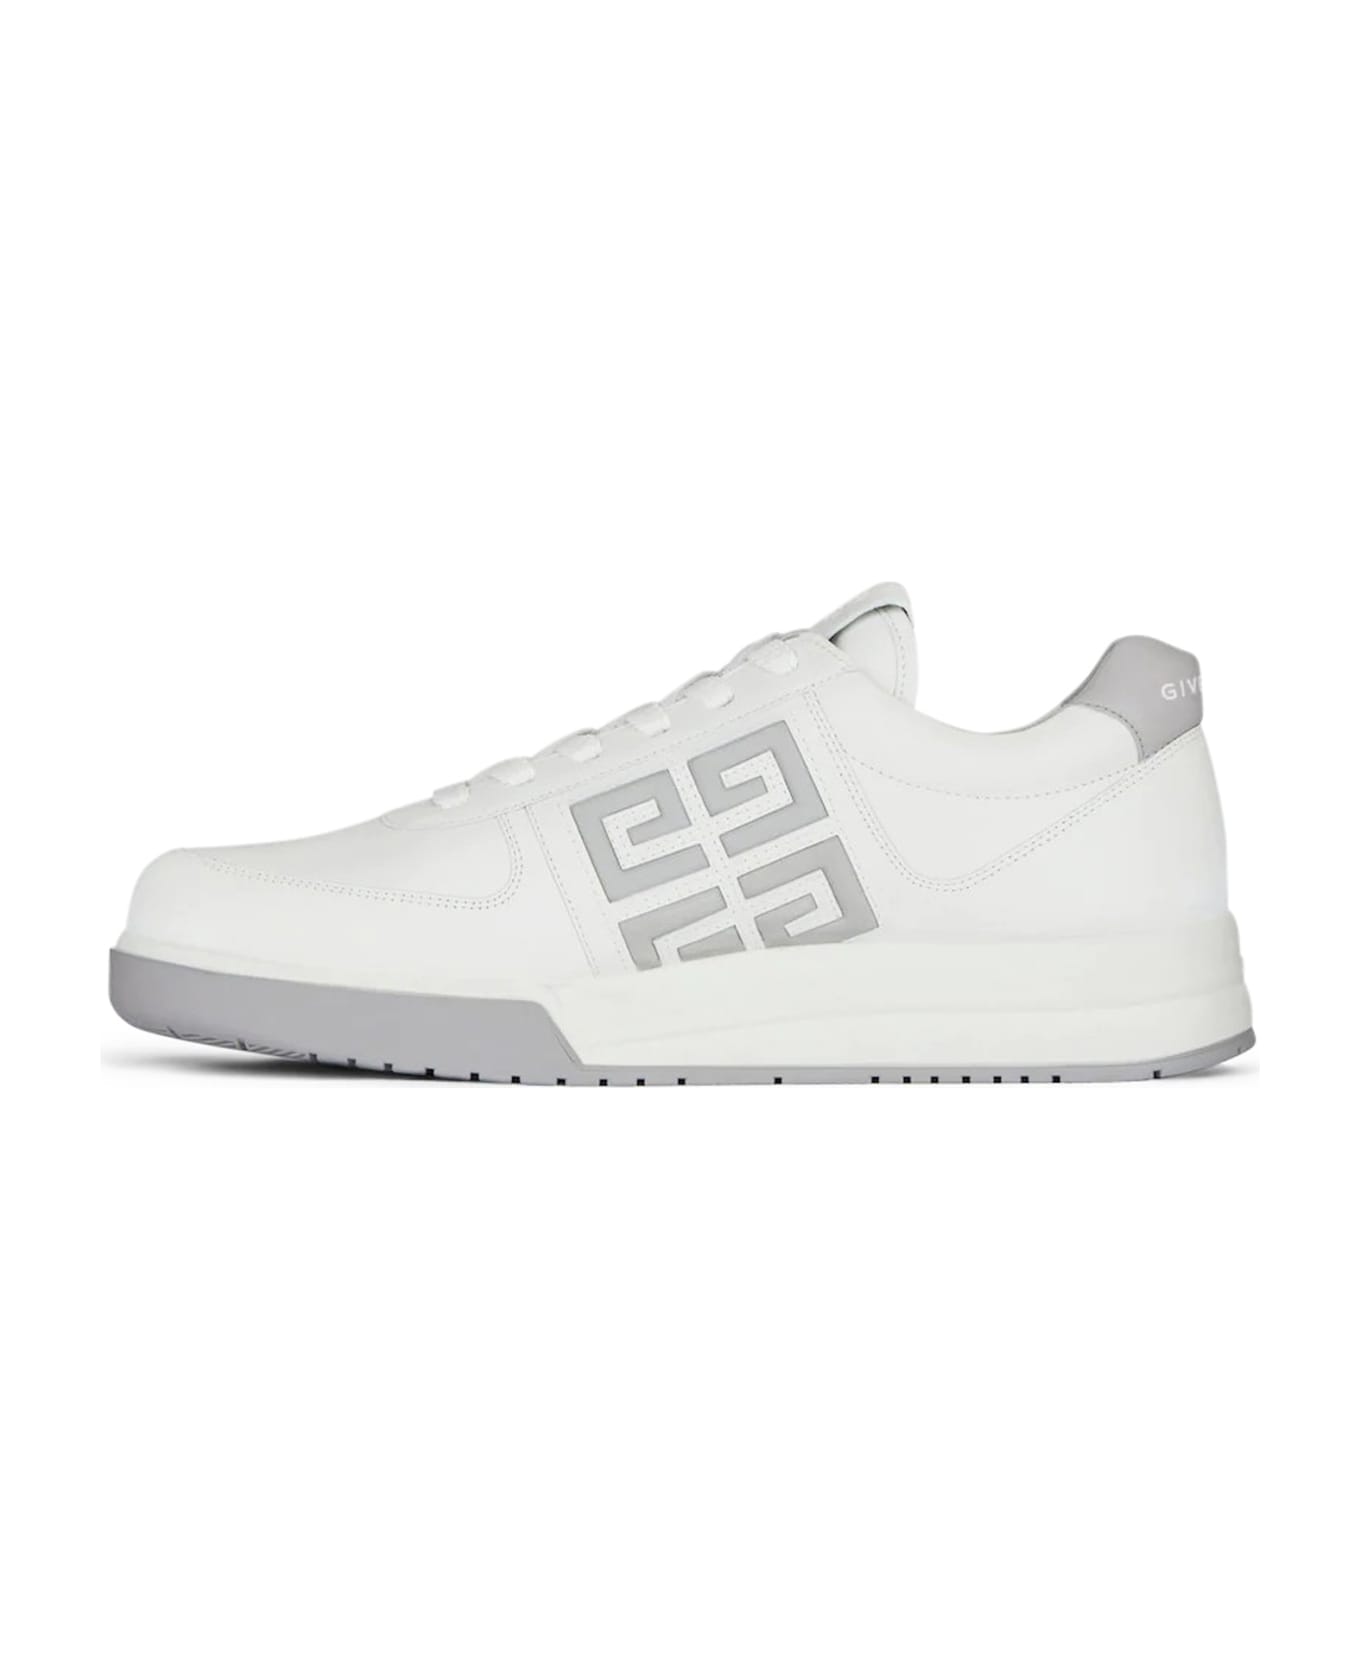 Givenchy G4 Low-top Sneakers - White Grey